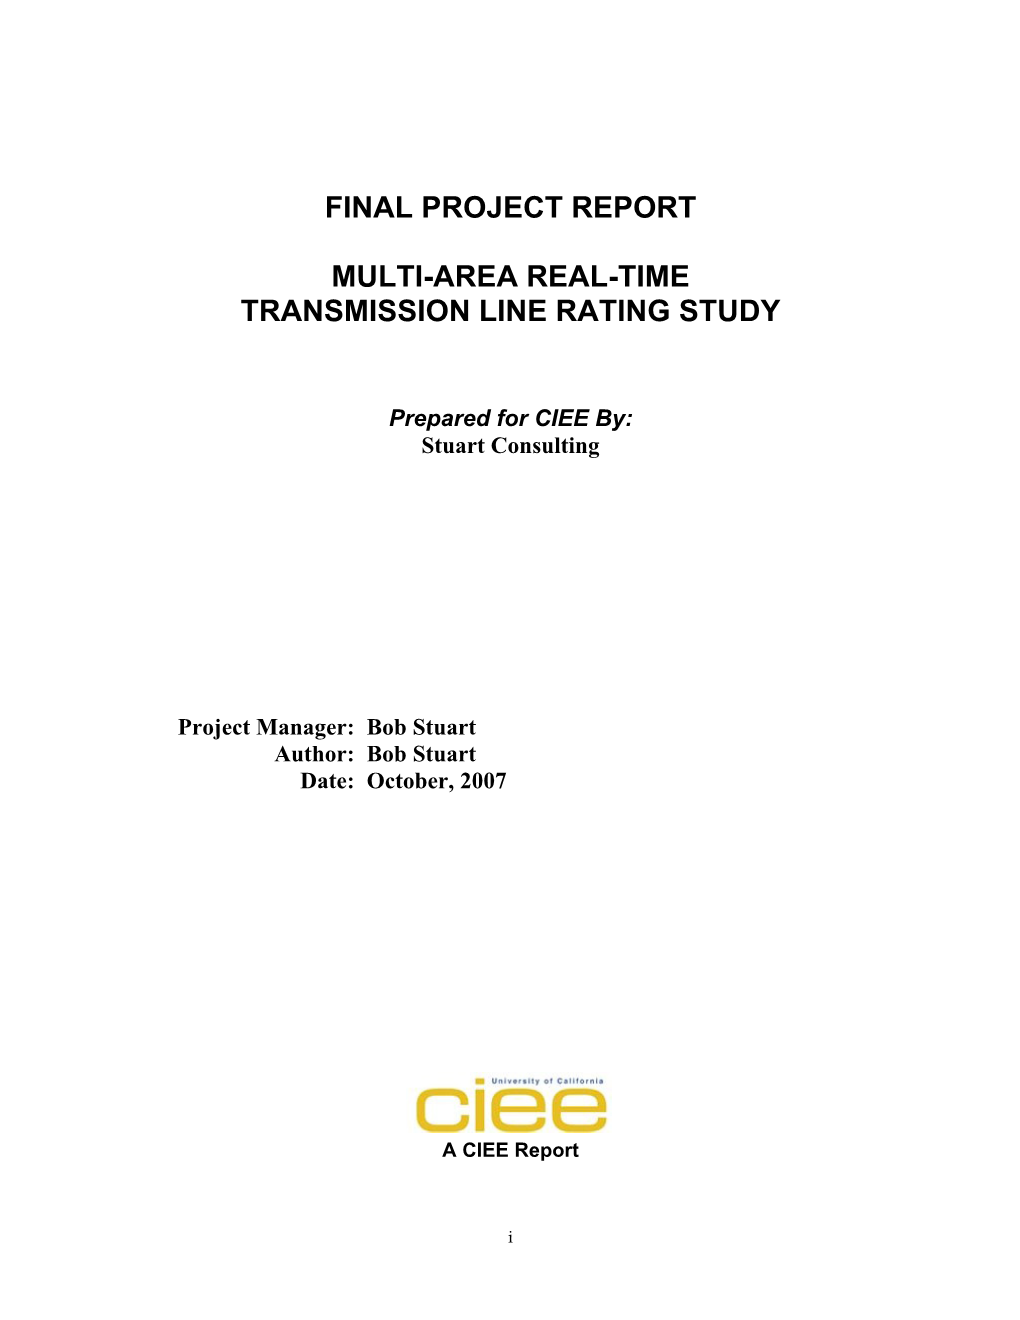 Final Project Report Multi-Area Real-Time Transmission Line Rating Study